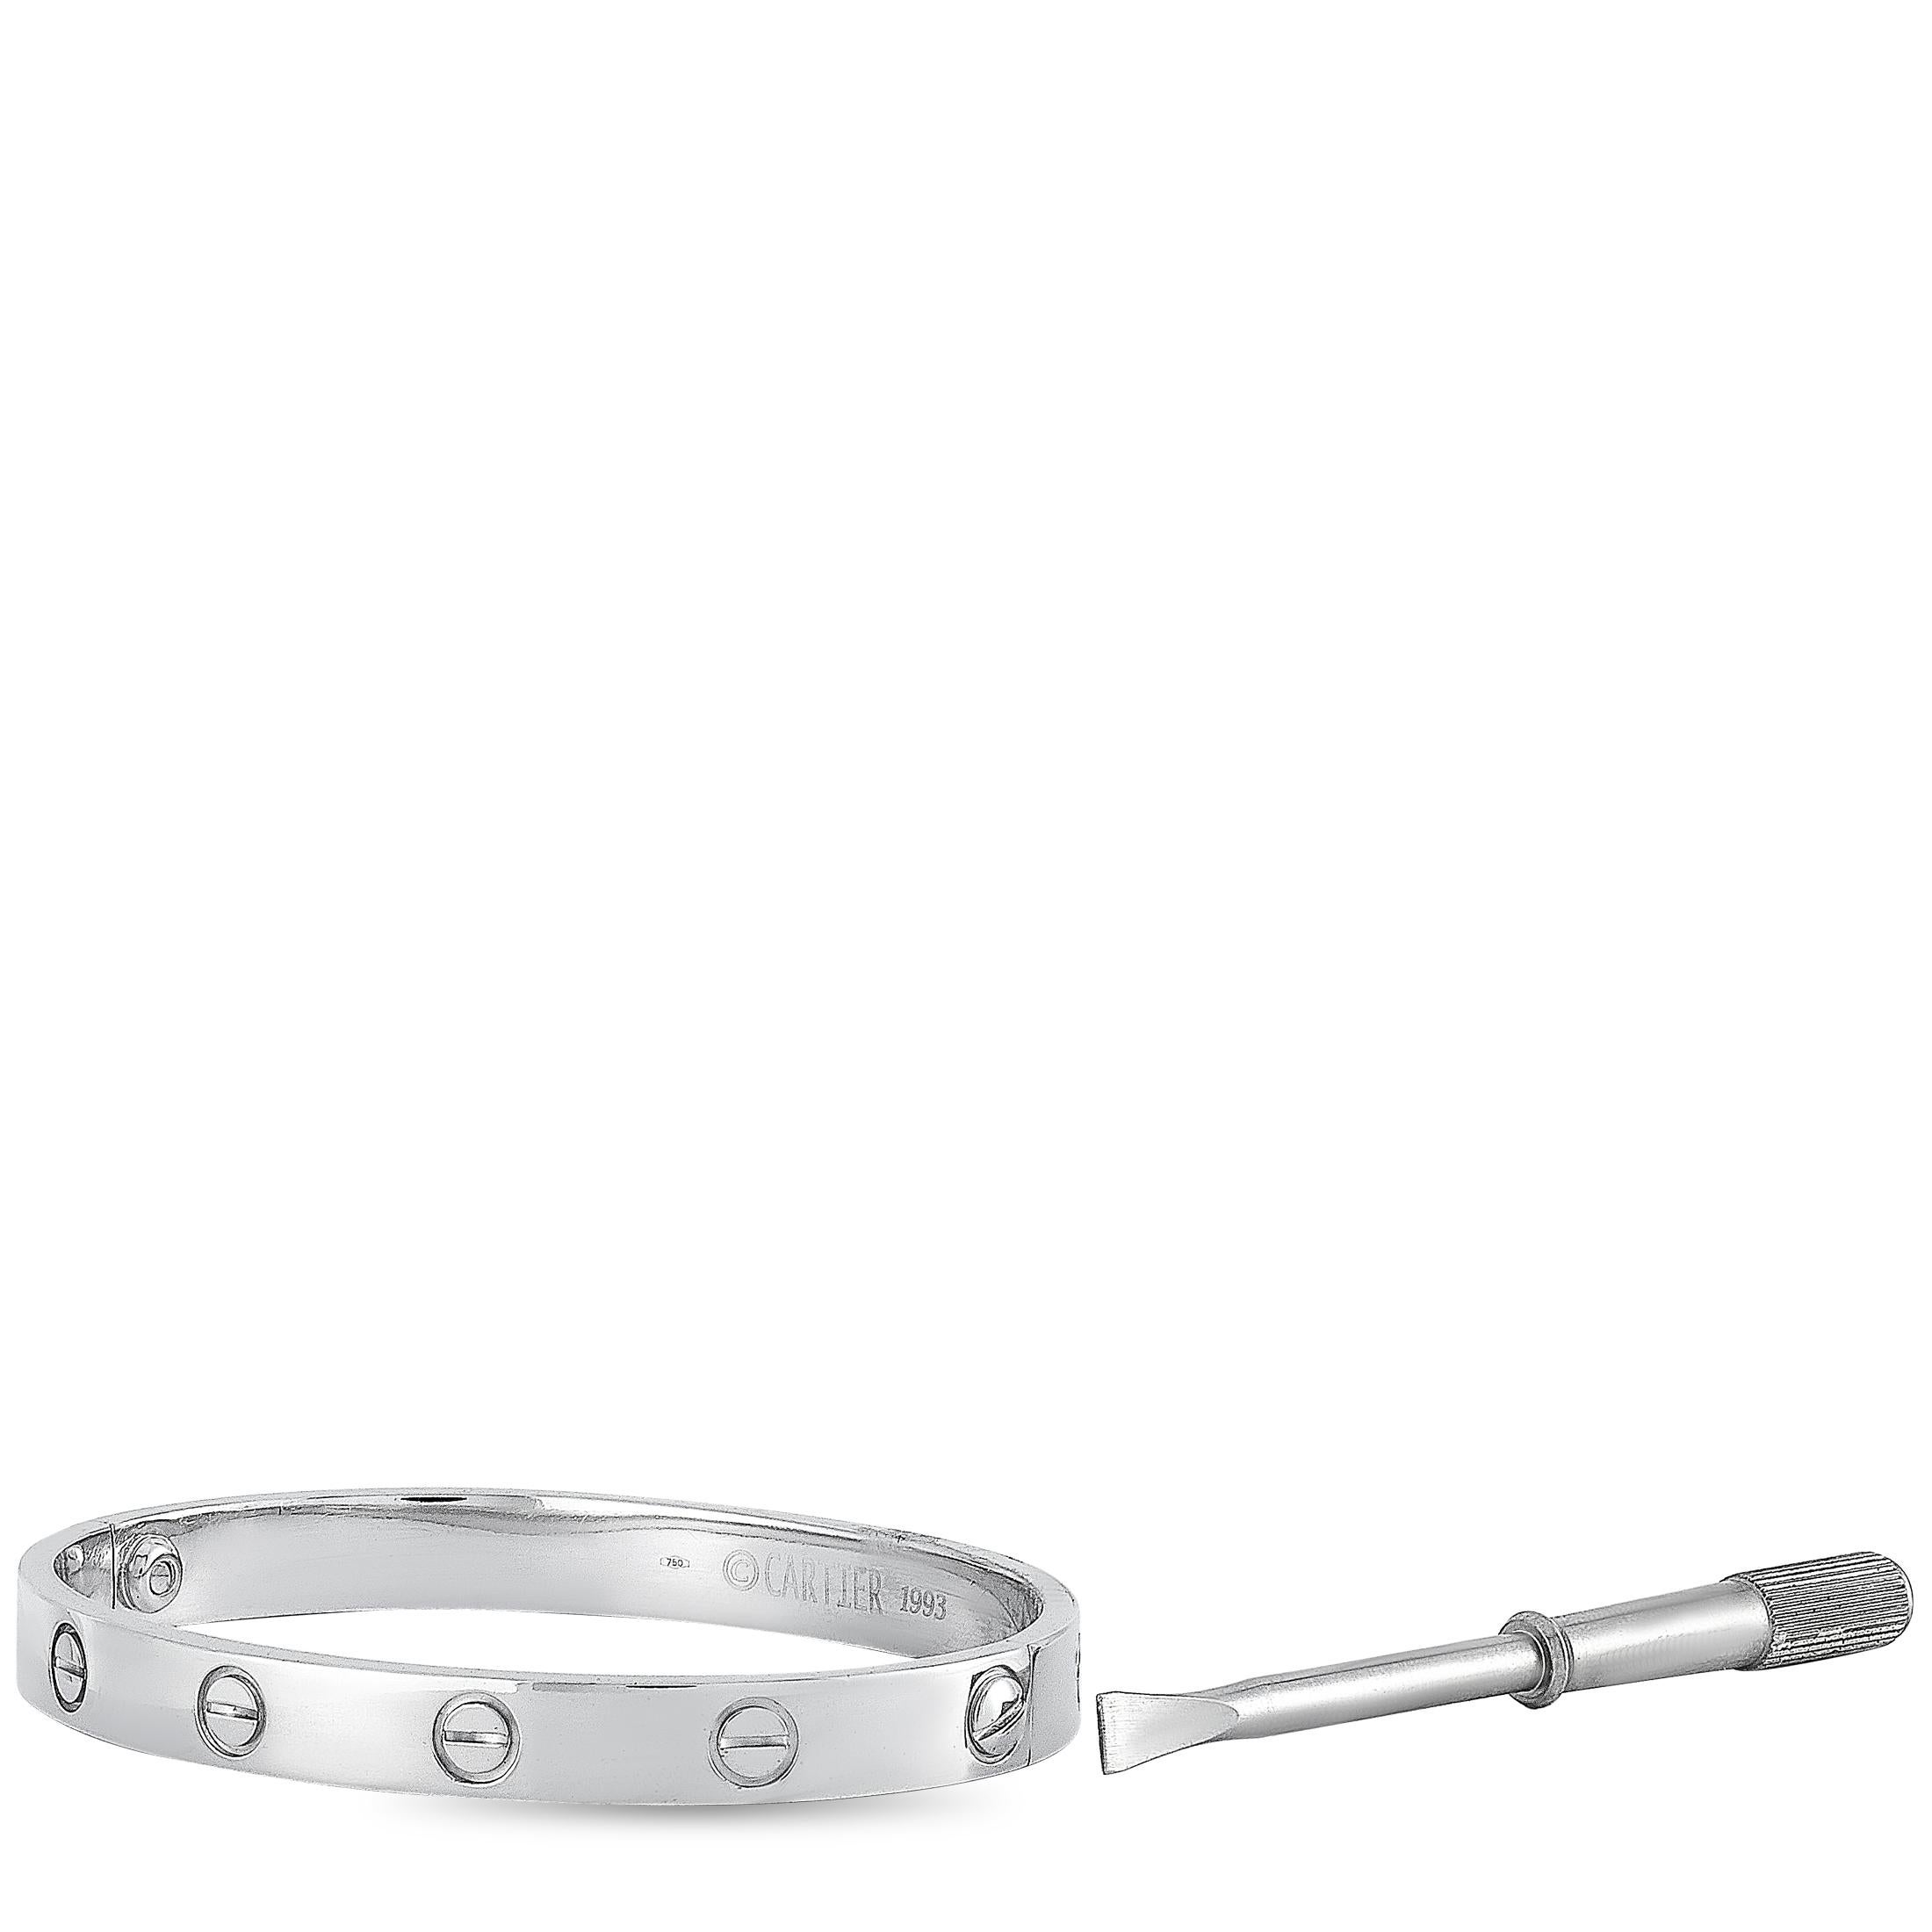 The Cartier “LOVE” bracelet is crafted from 18K white gold and measures 6.3” in length. The bracelet weighs 32.5 grams and is delivered with a screwdriver.